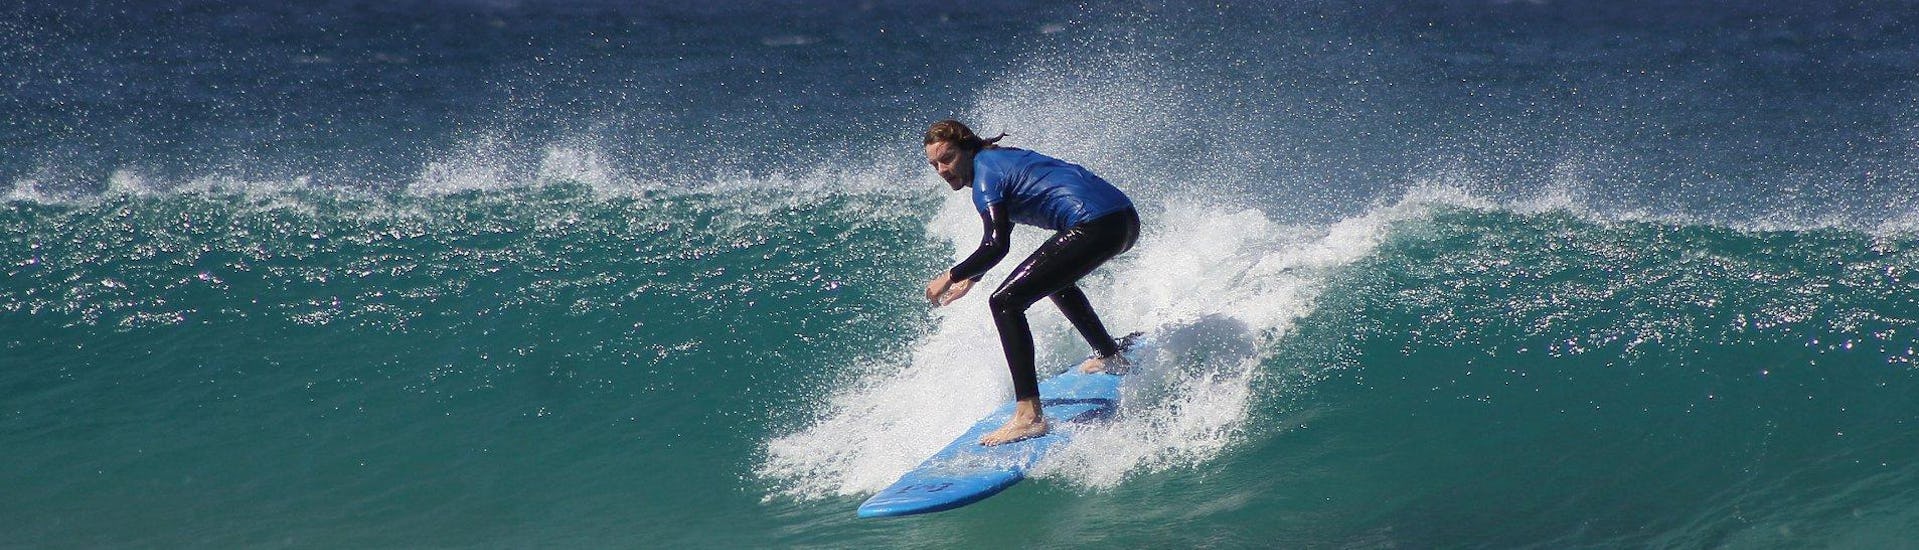 Private Surfing Lesson For Kids Adults All Levels By Fuerteventura Surf School